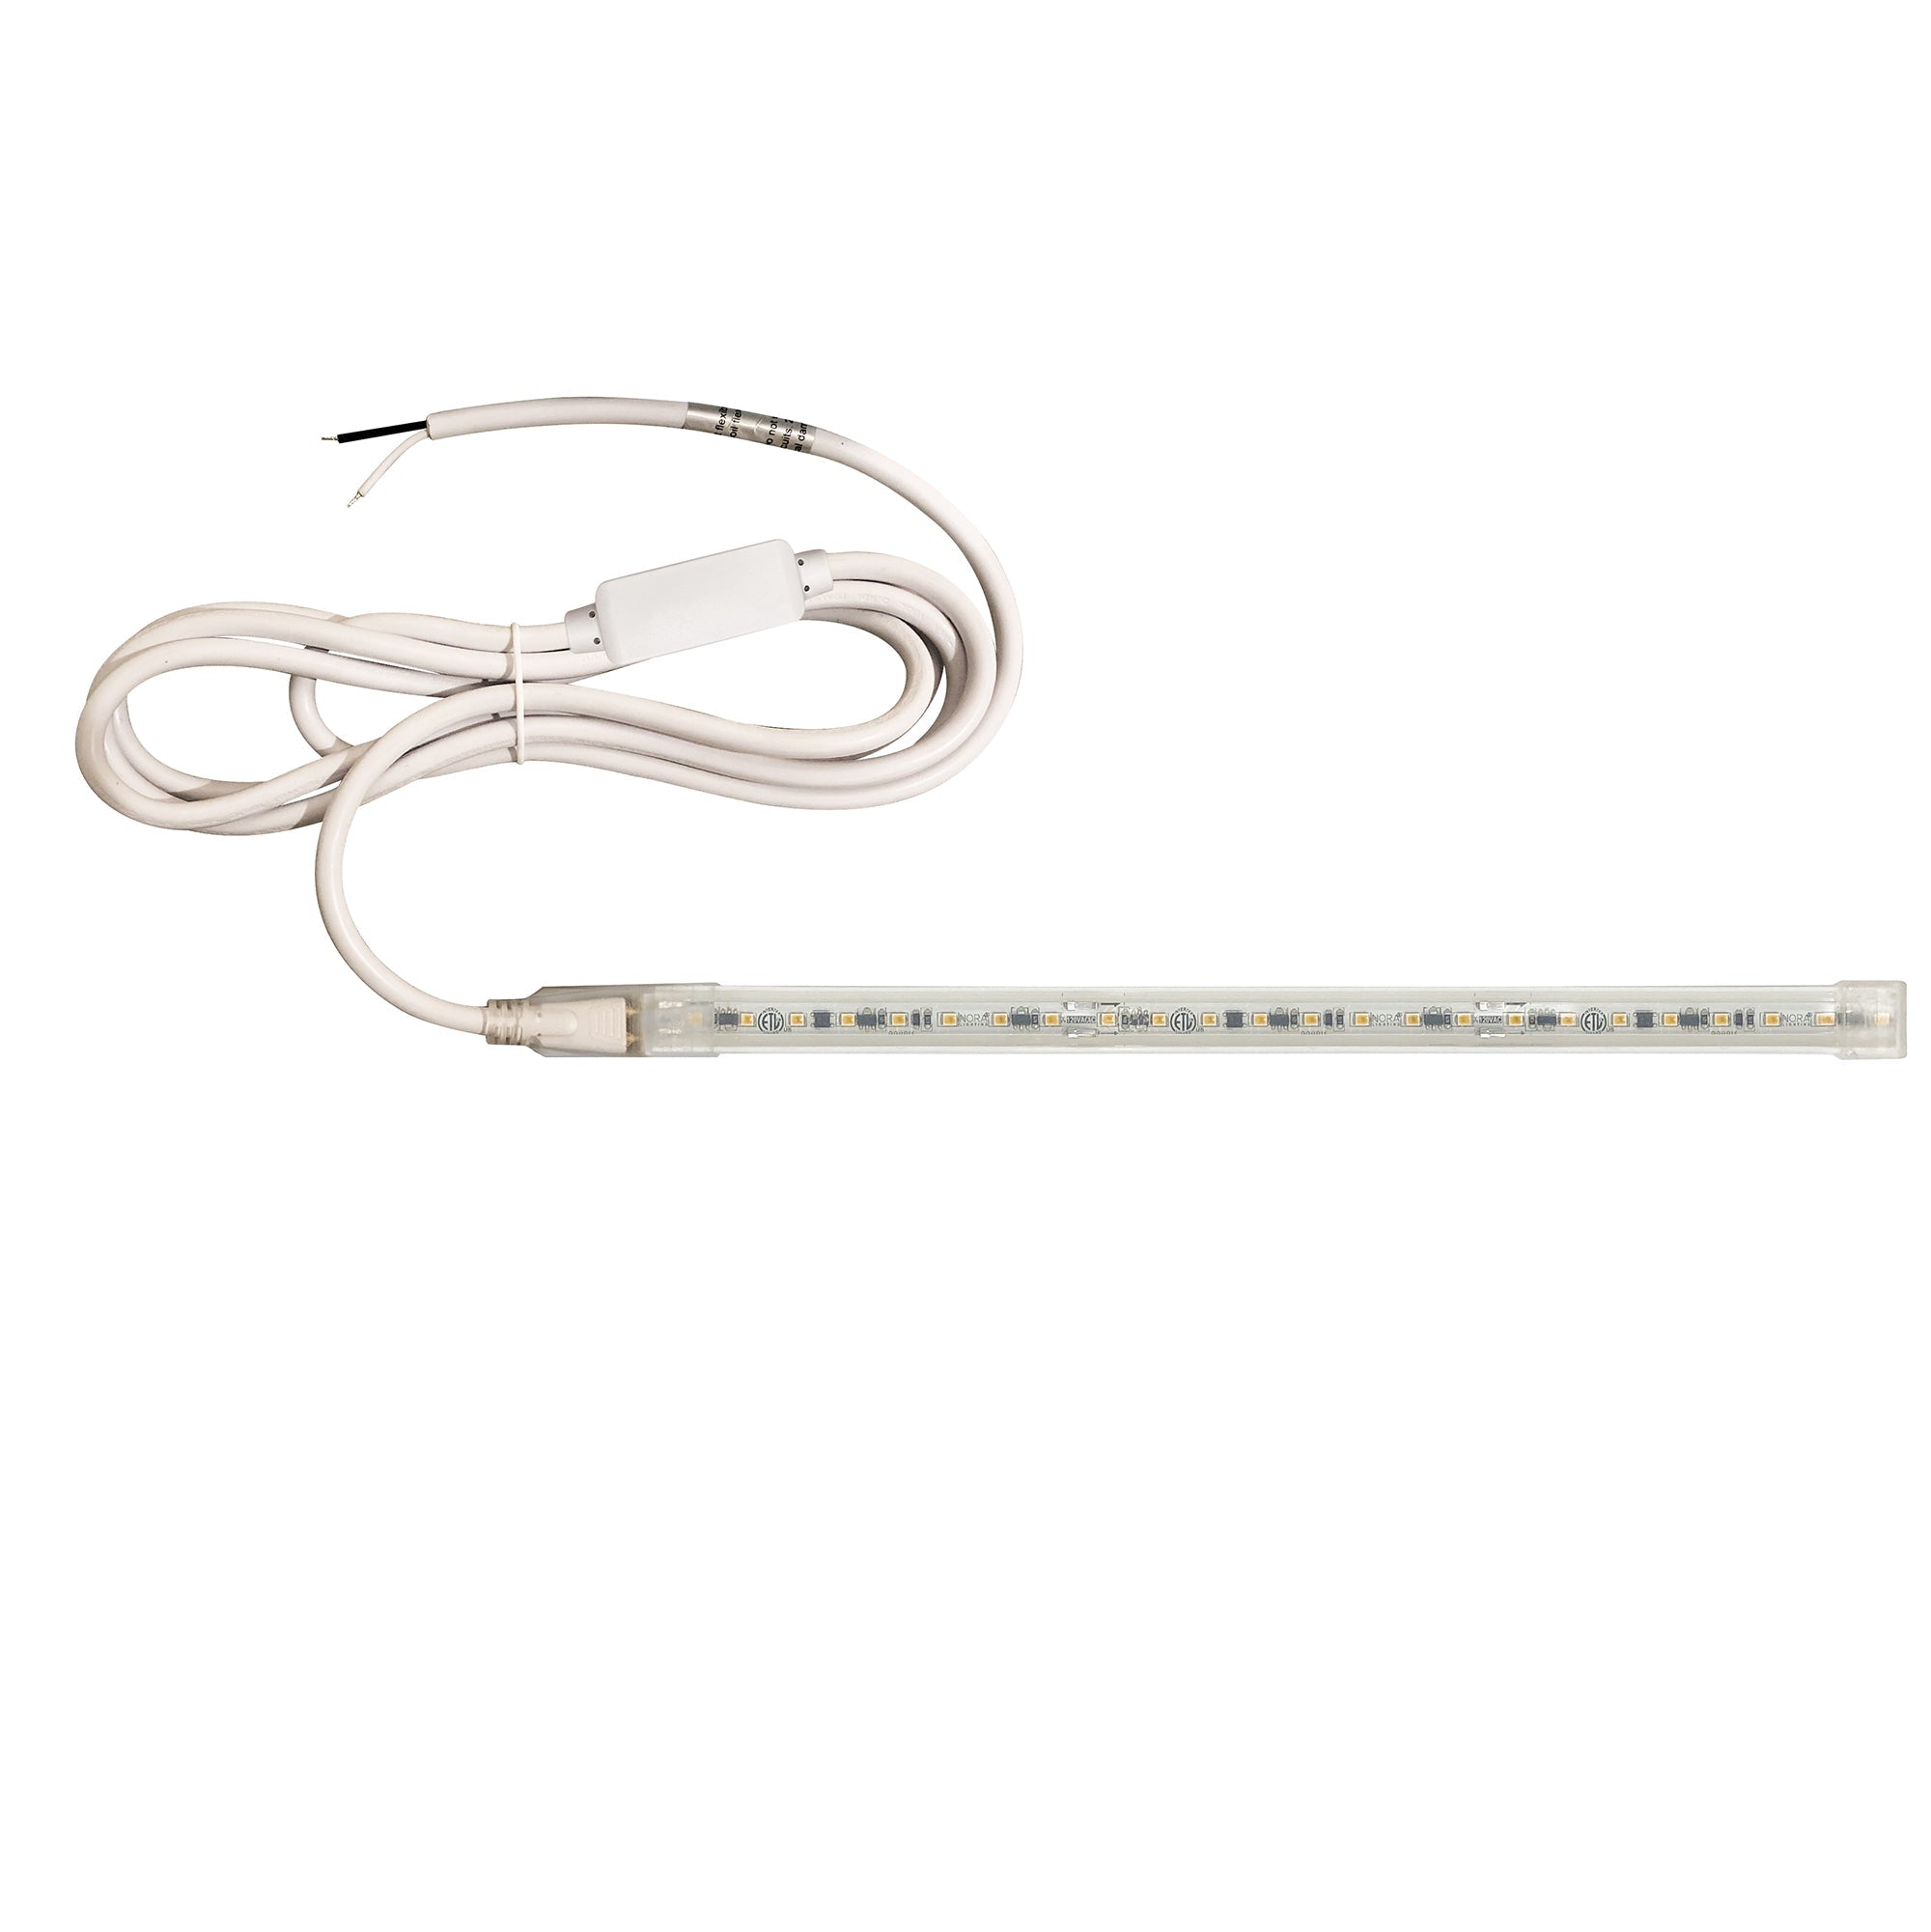 Nora Lighting NUTP13-W90-12-930/HWSP - Accent / Undercabinet - Custom Cut 90-ft 120V Continuous LED Tape Light, 330lm / 3.6W per foot, 3000K, w/ Mounting Clips and 8' Hardwired Power Cord w/ Surge Protector